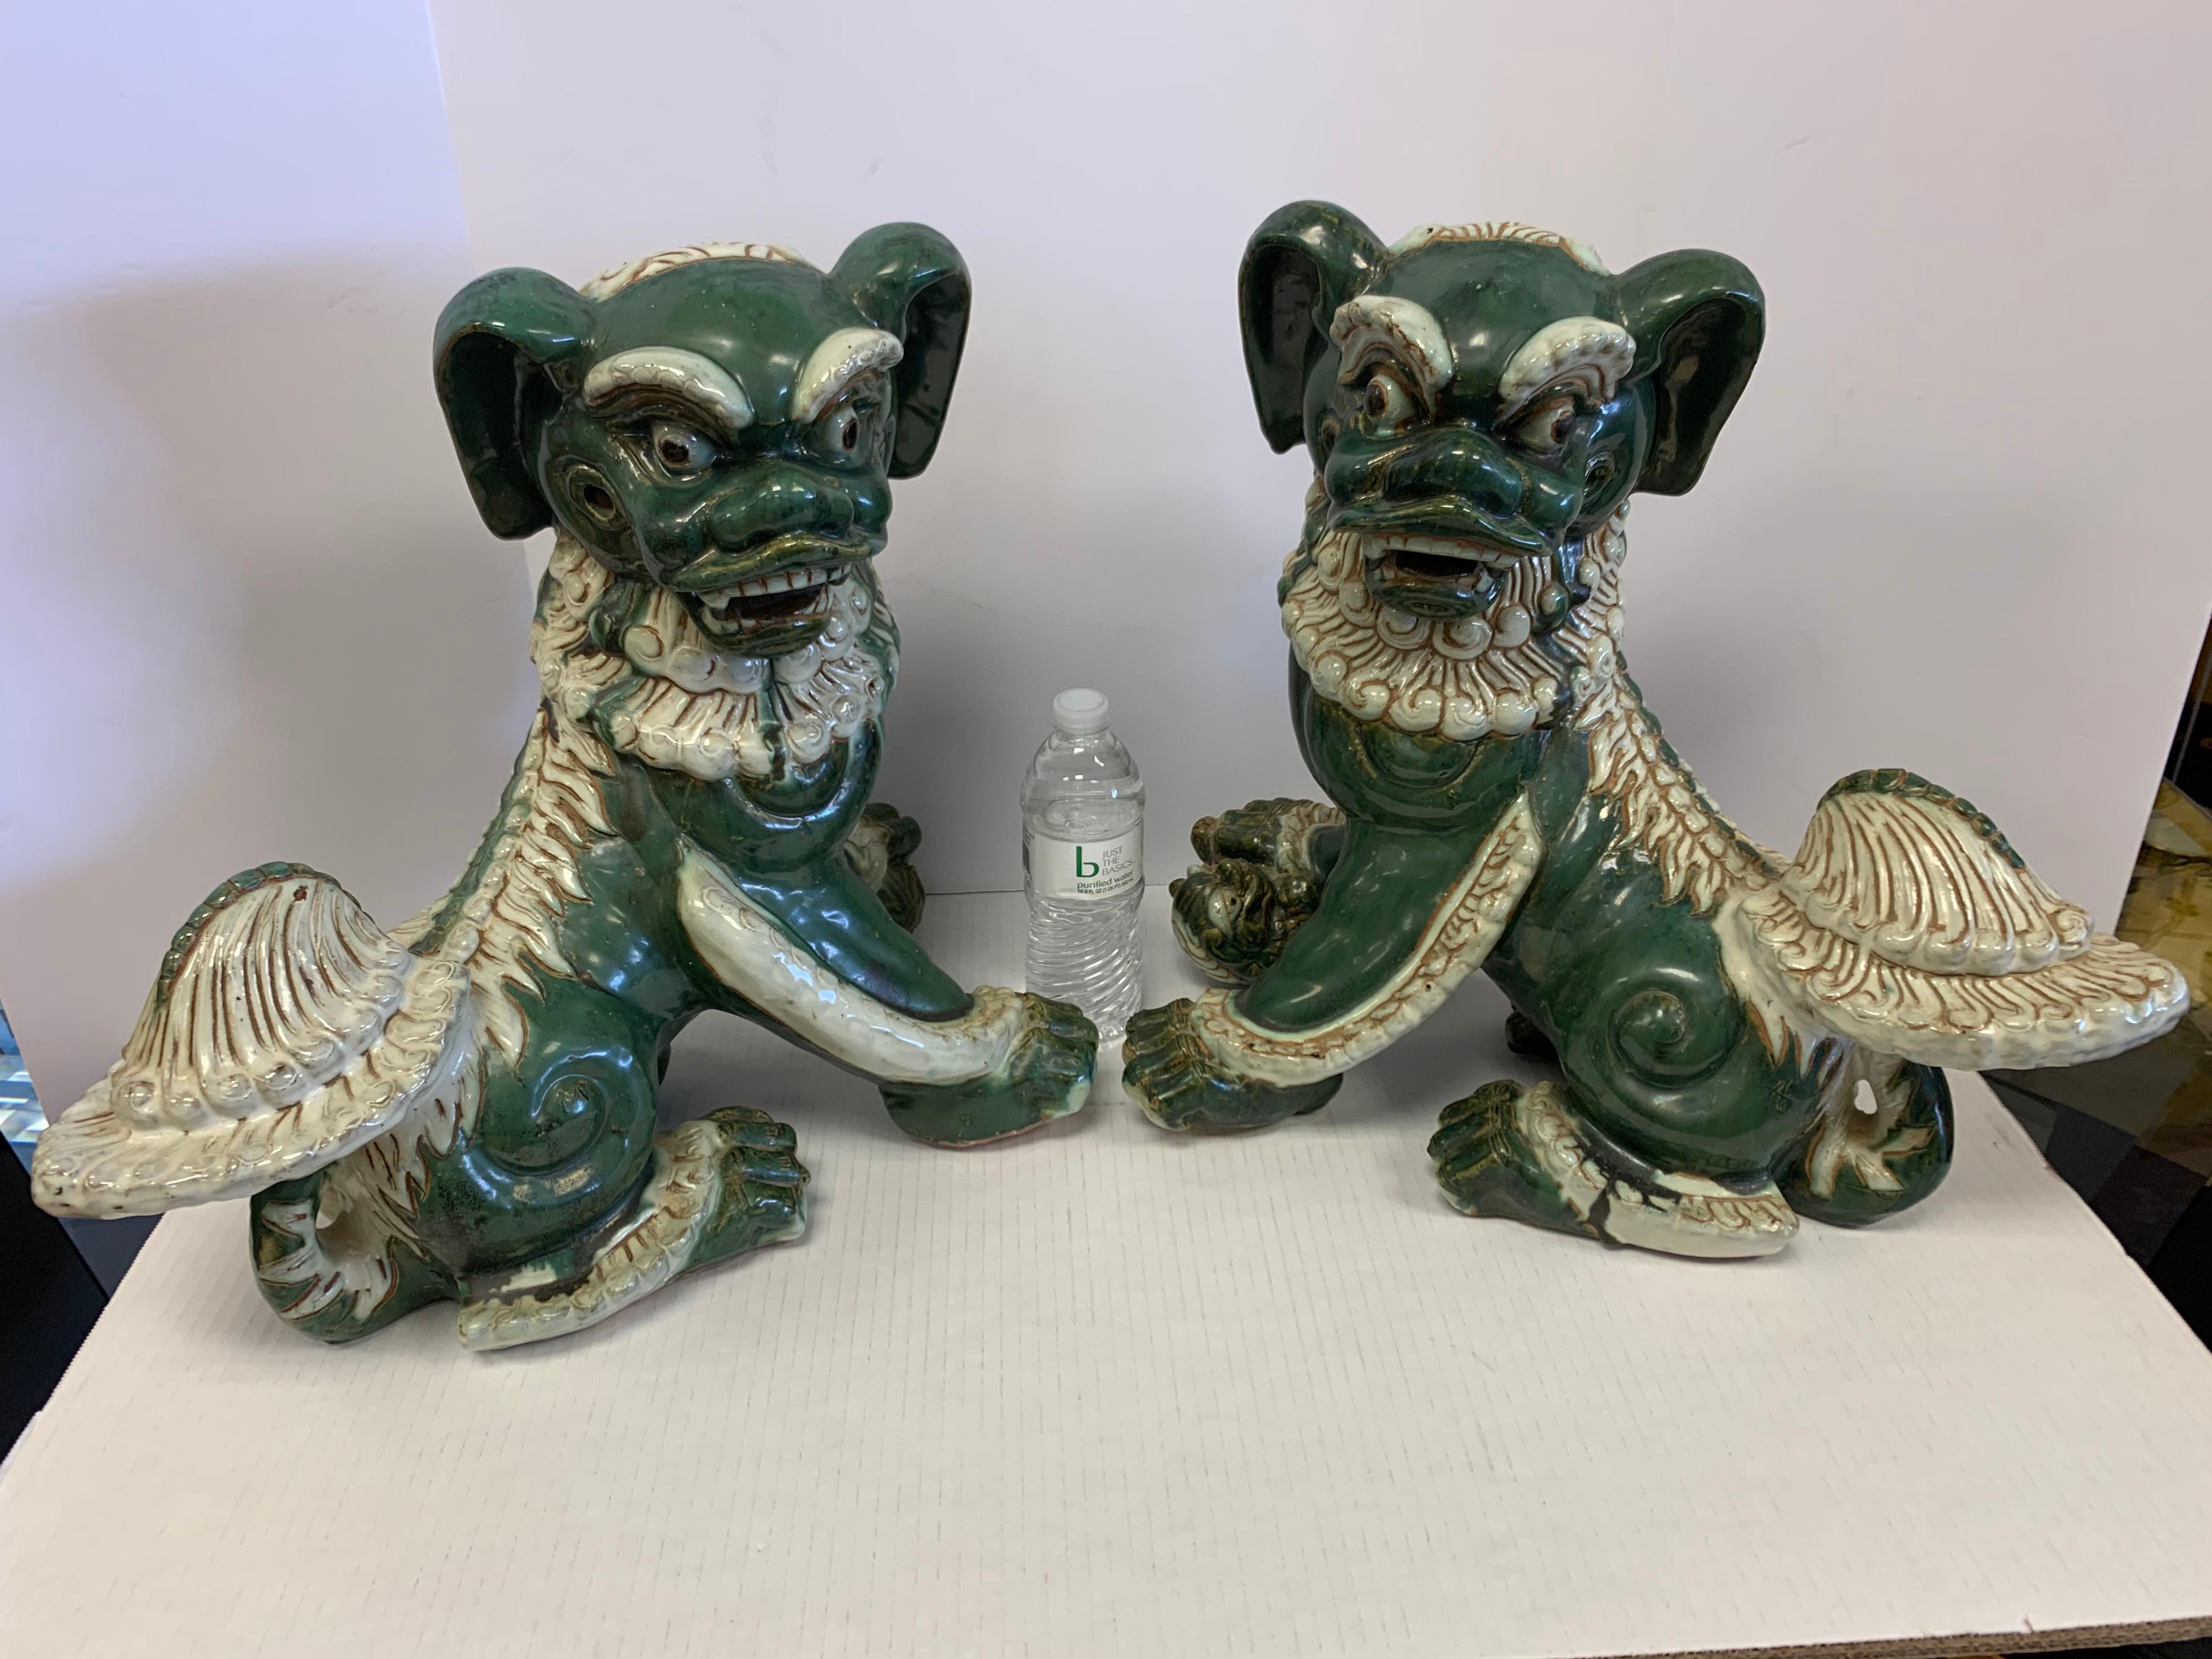 Extra-Large Pair of Chinese Glazed Porcelain Foo Dogs Sculptures 11